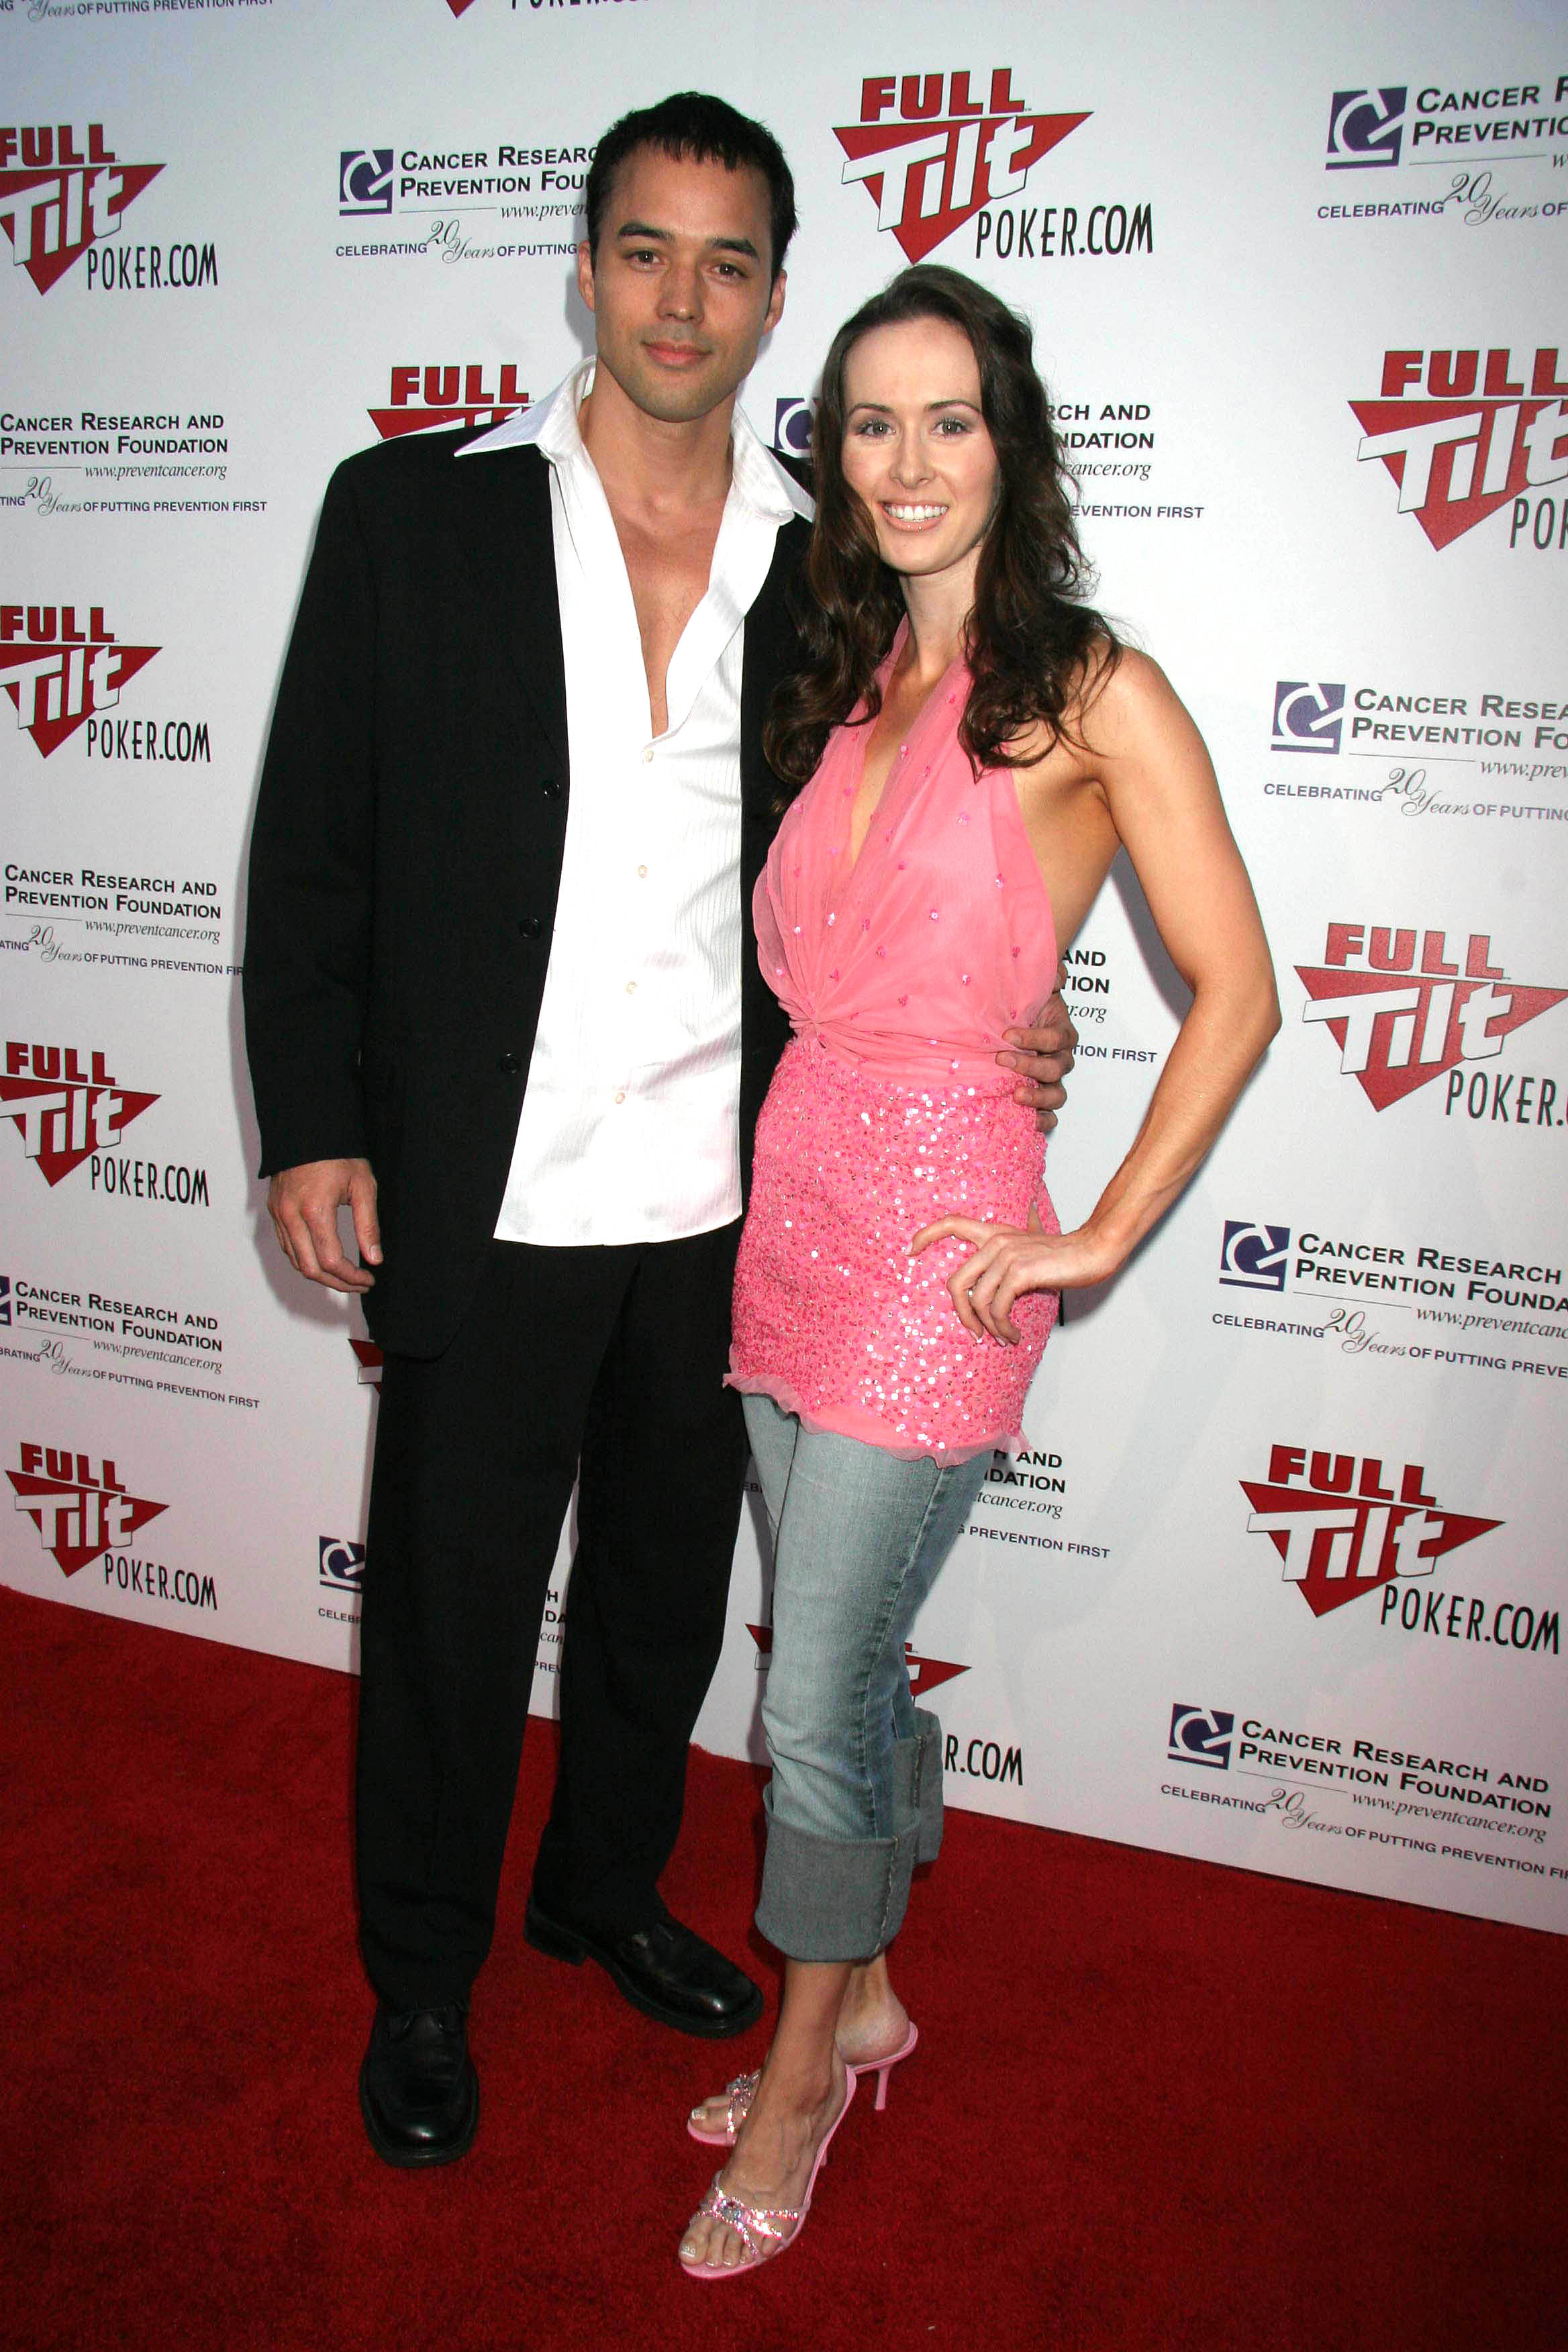 Scott Connors and Erin Carufel on the red carpet at the Full Tilt Celebrity Poker Tournament in Hollywood, CA.